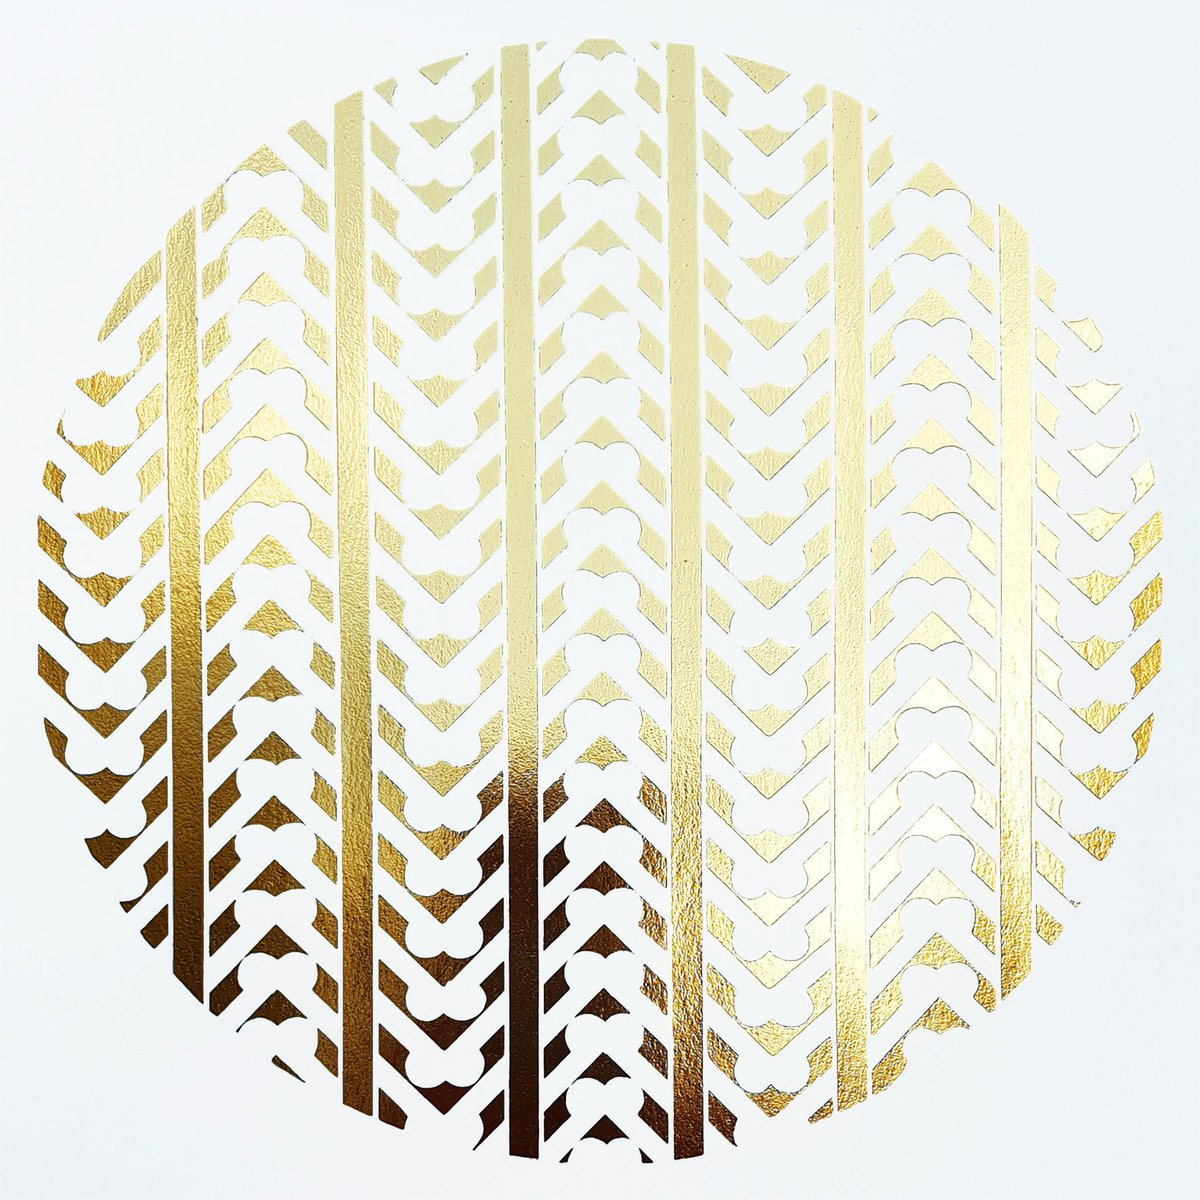 Image of 'Interweave' - Limited Edition Gold foil Print